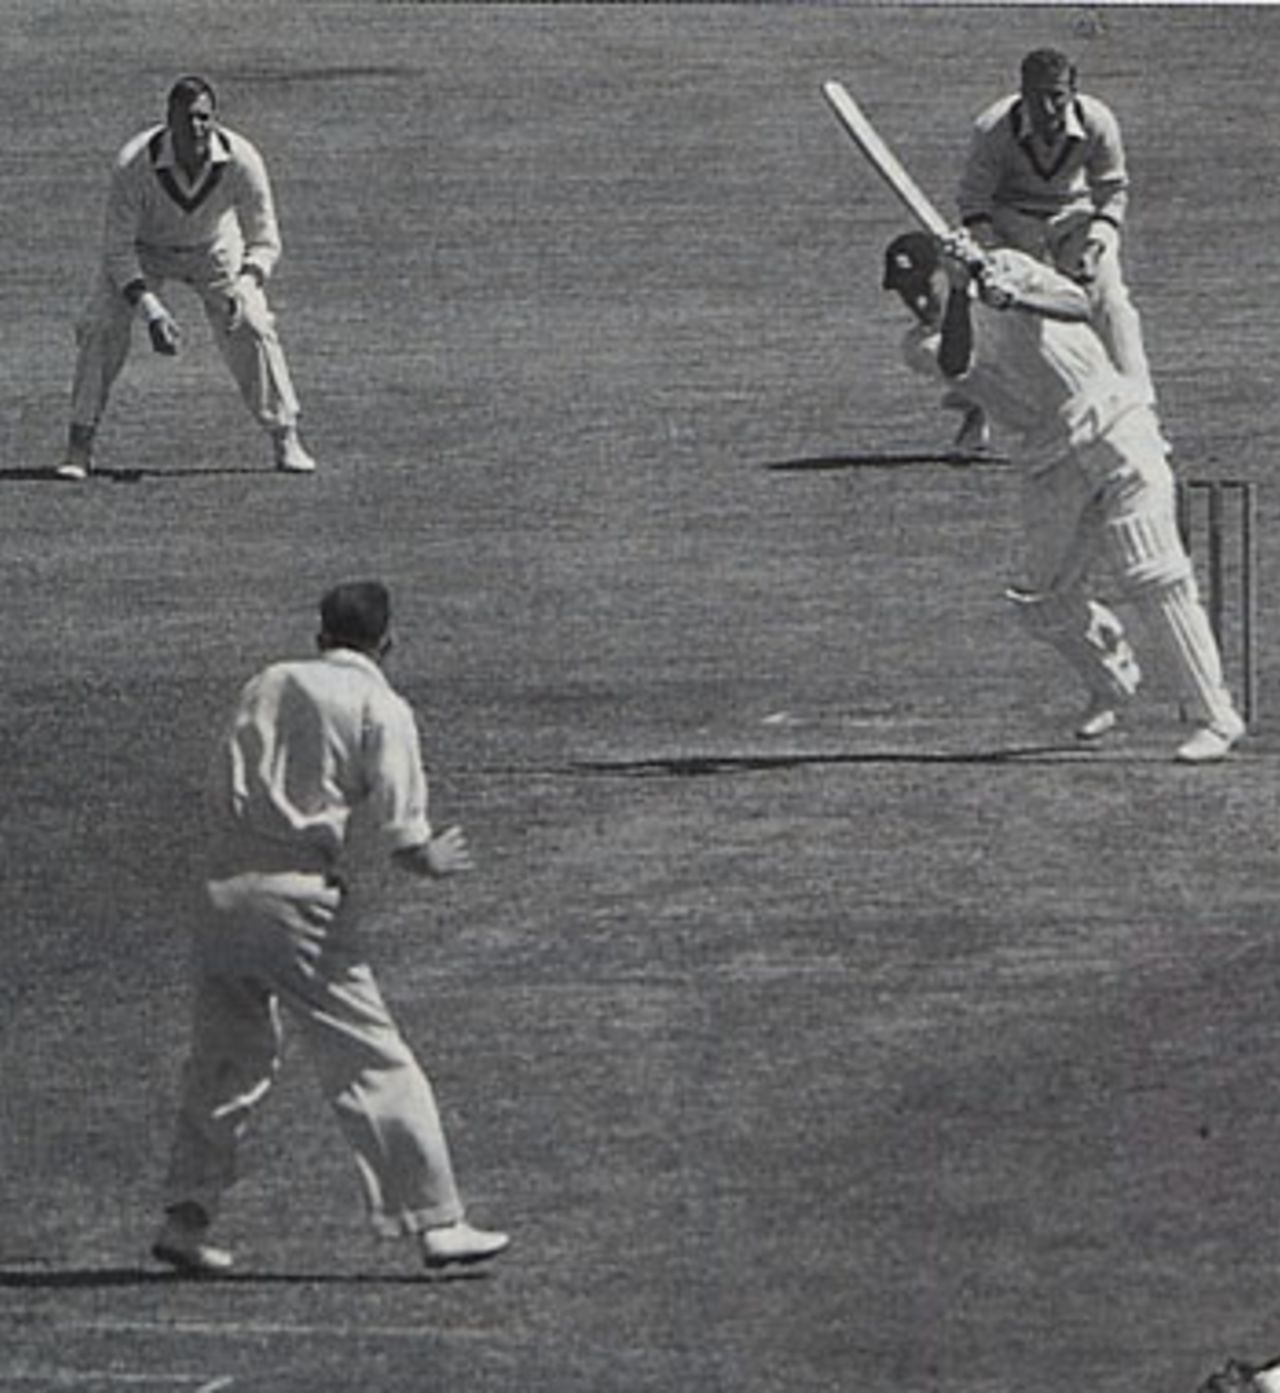 Peter May, on his way to a century in the Sydney Test, drives Bill Johnston, with Archer and Hole hopeful at slip. May's partner is Colin Cowdrey, who made 54 in their crucial stand of 116, December 21, 1954